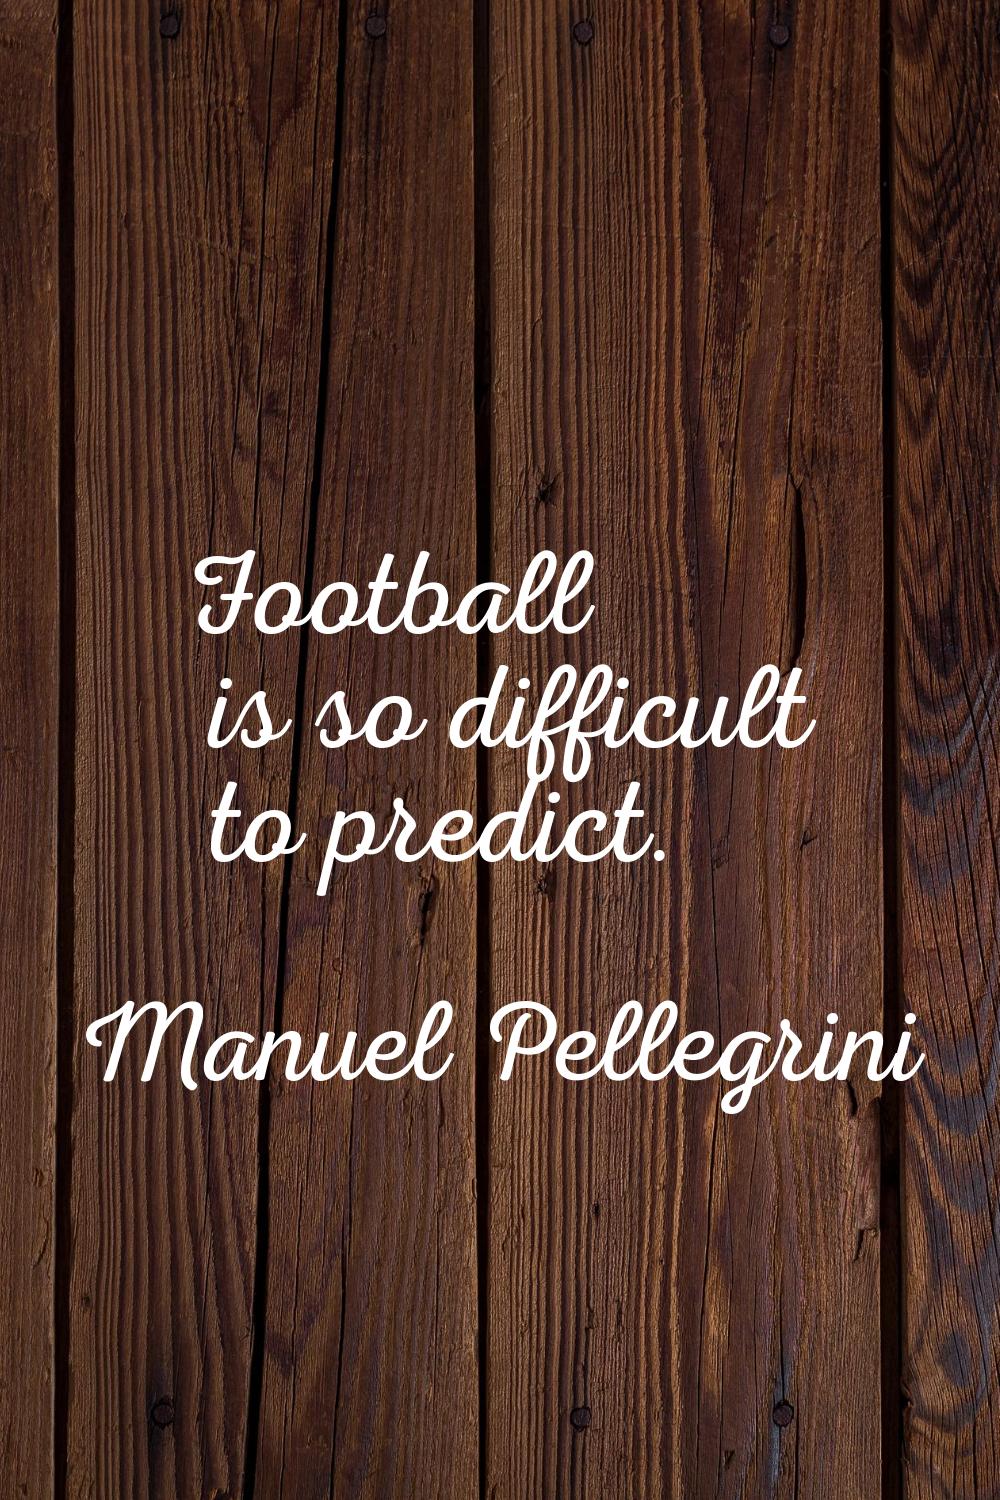 Football is so difficult to predict.